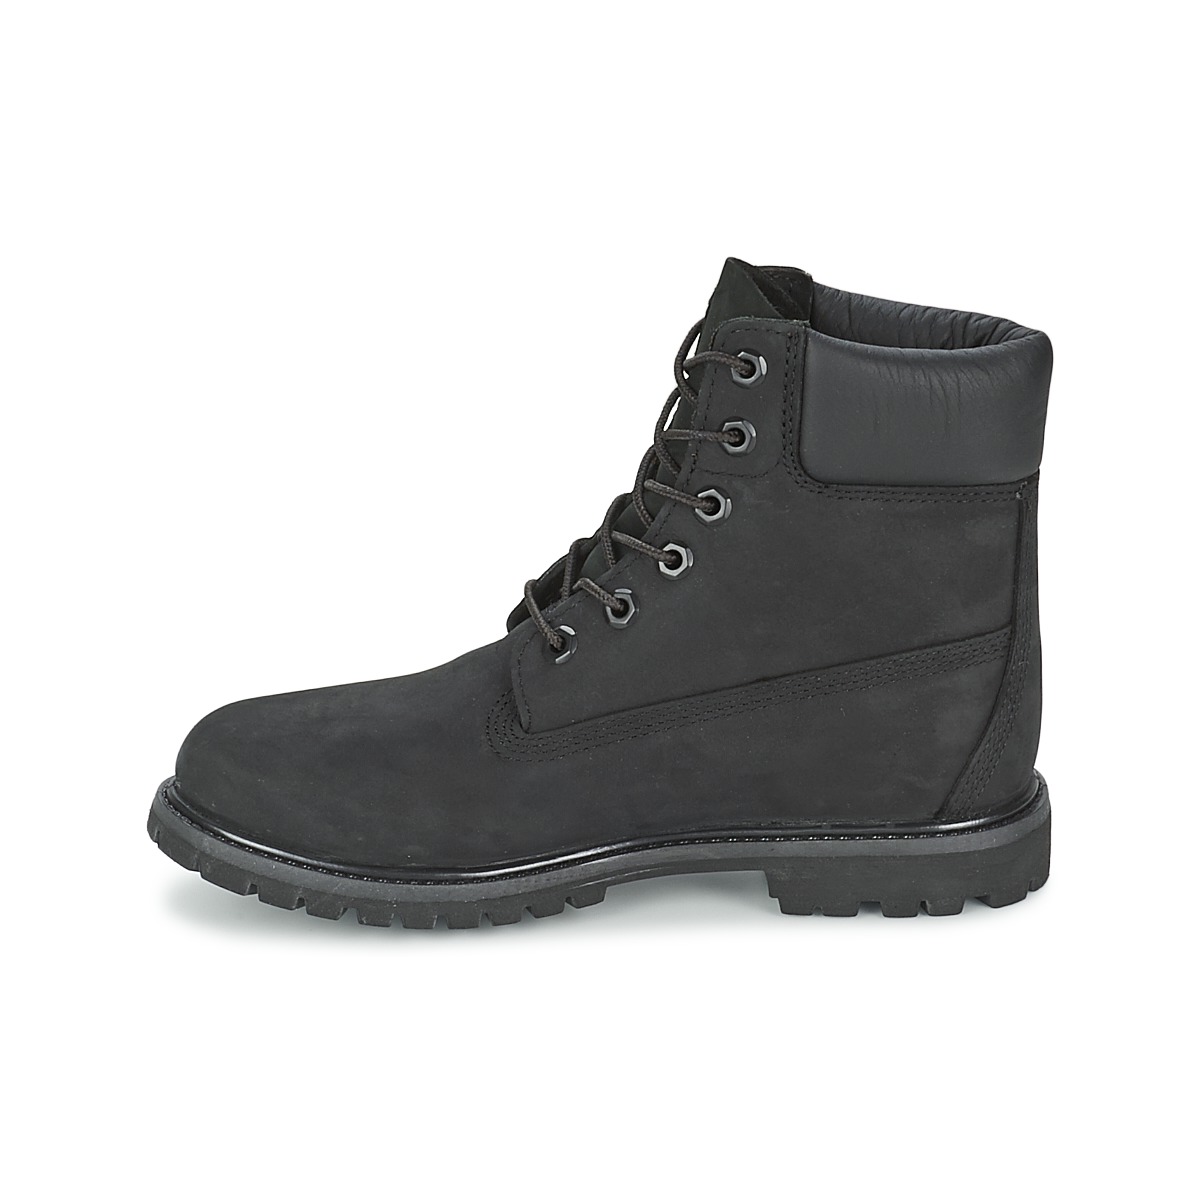 Timberland Noir 6IN PREMIUM BOOT - W vhkSeJy8